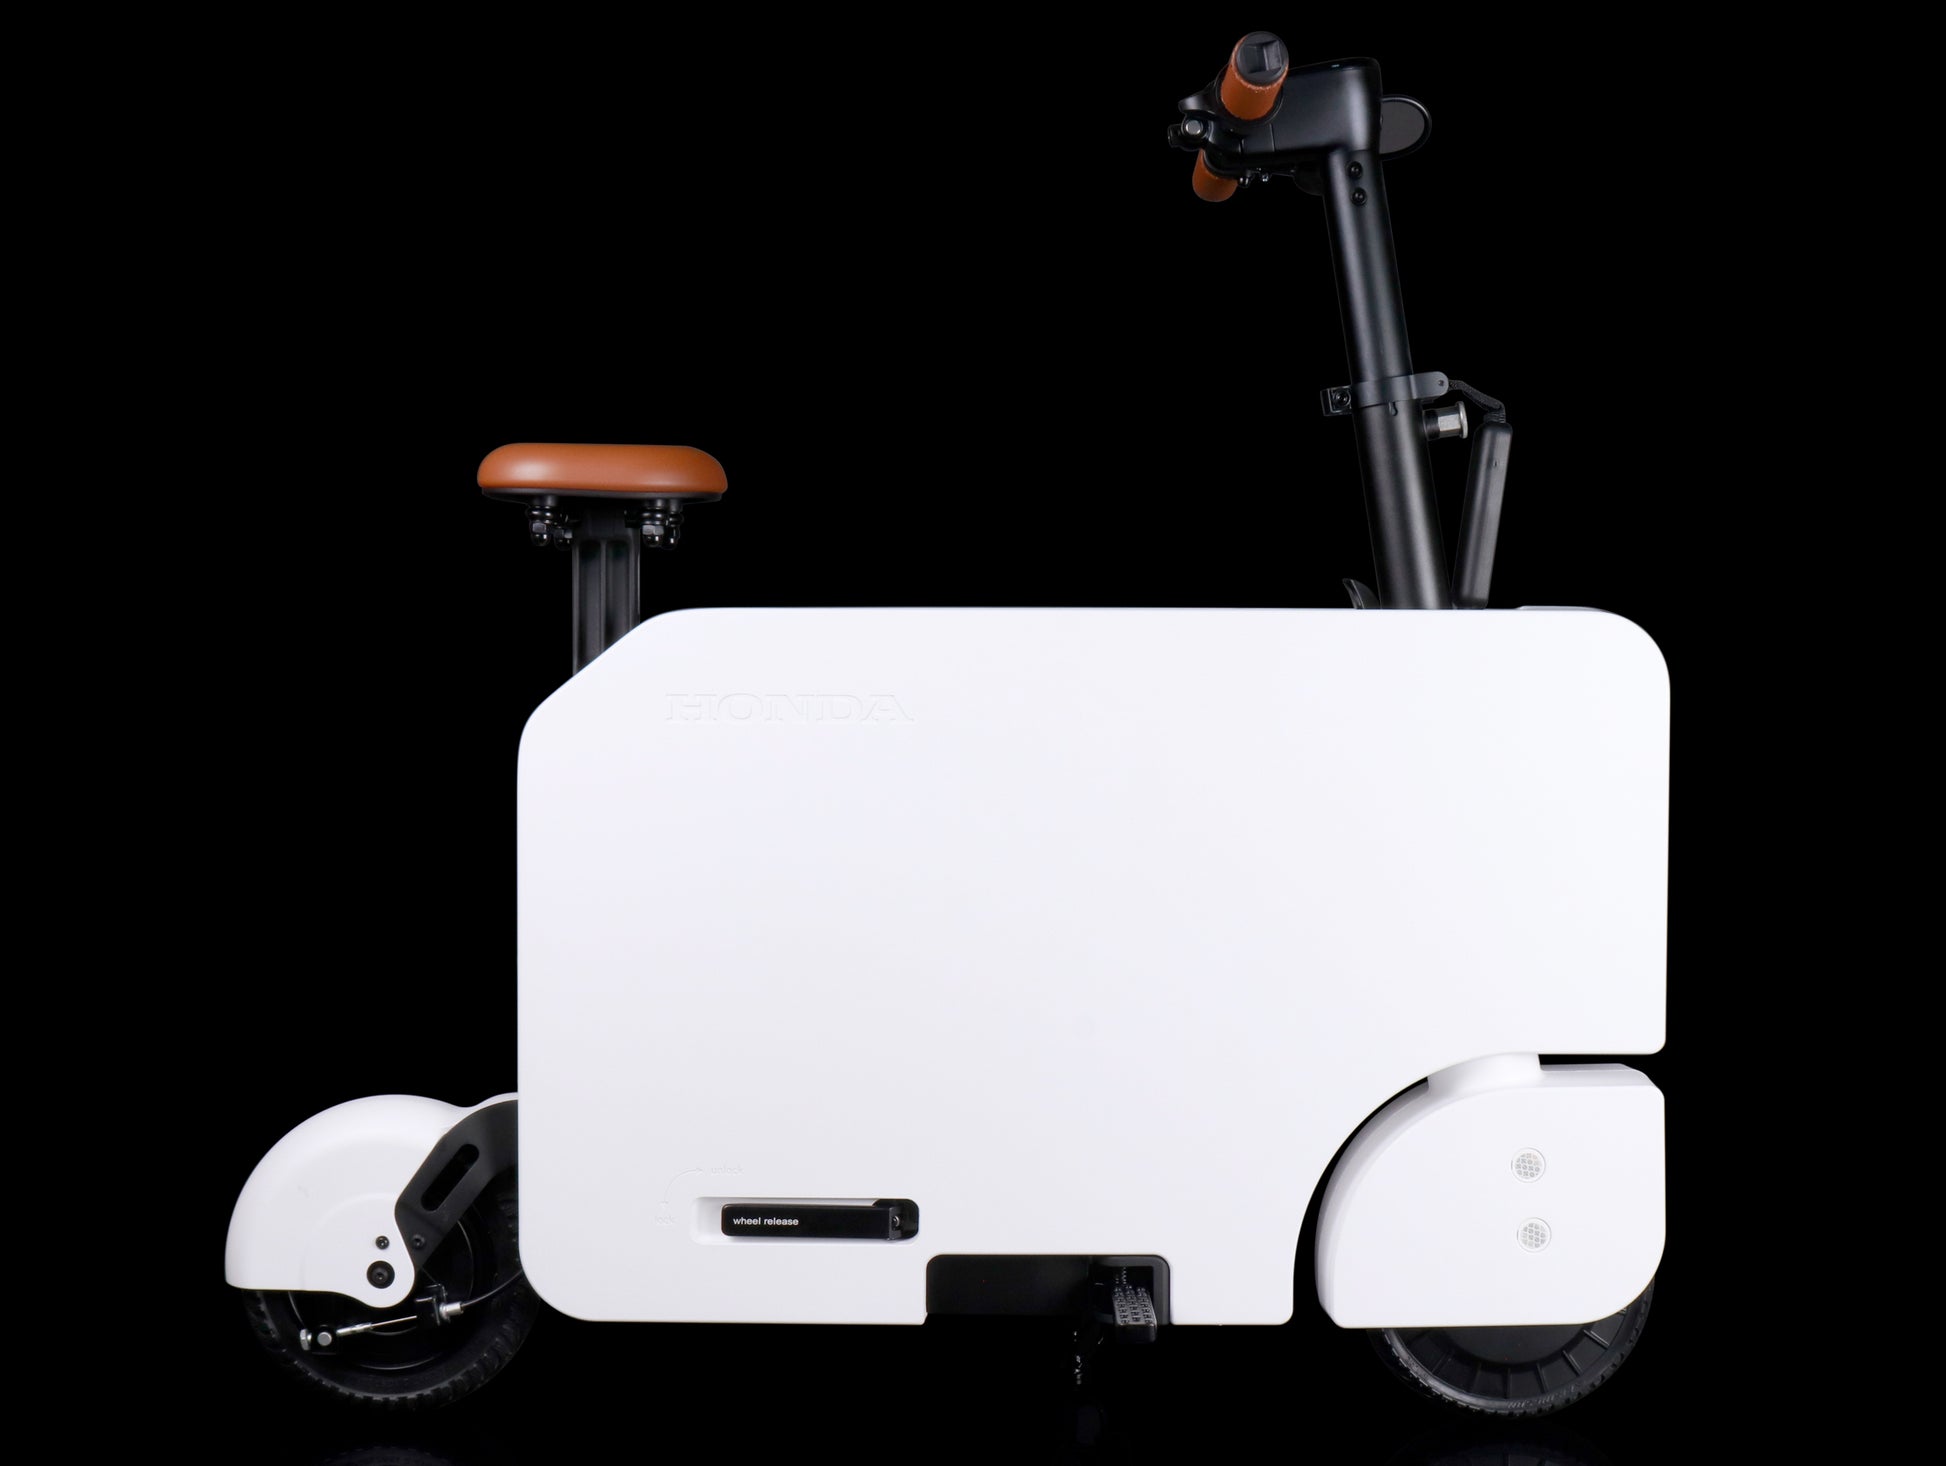 ellectric — Honda Motocompacto electric scooter – redefining urban mobility  with style and portability